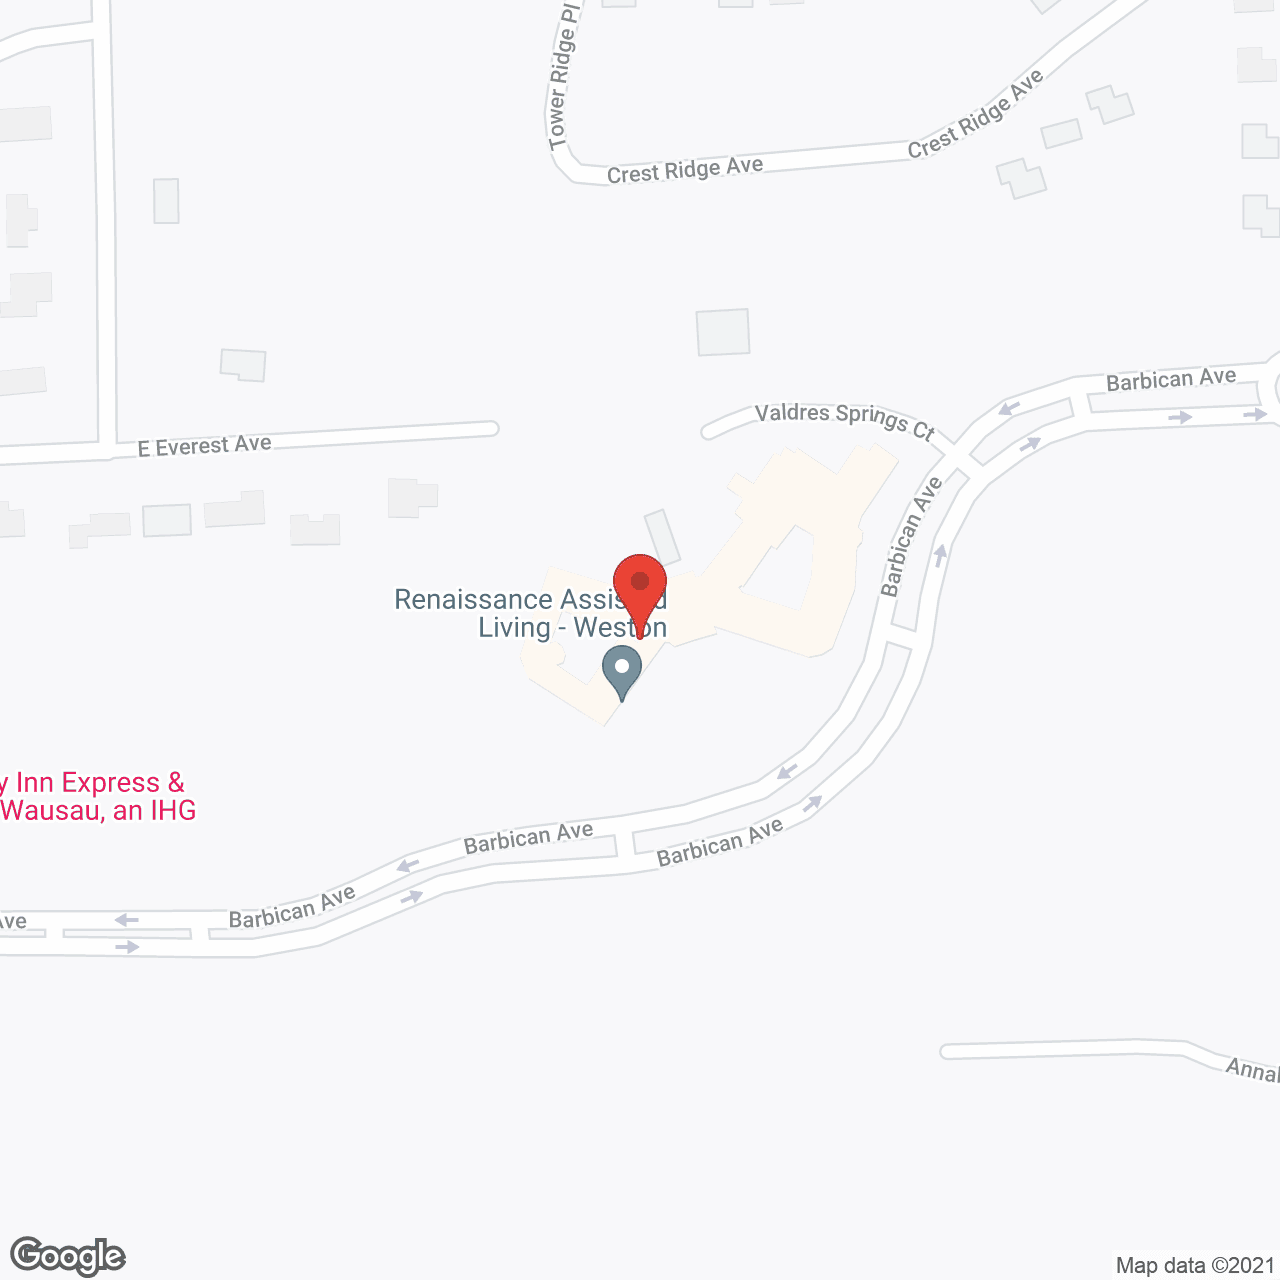 Renaissance Assisted Living-Weston in google map